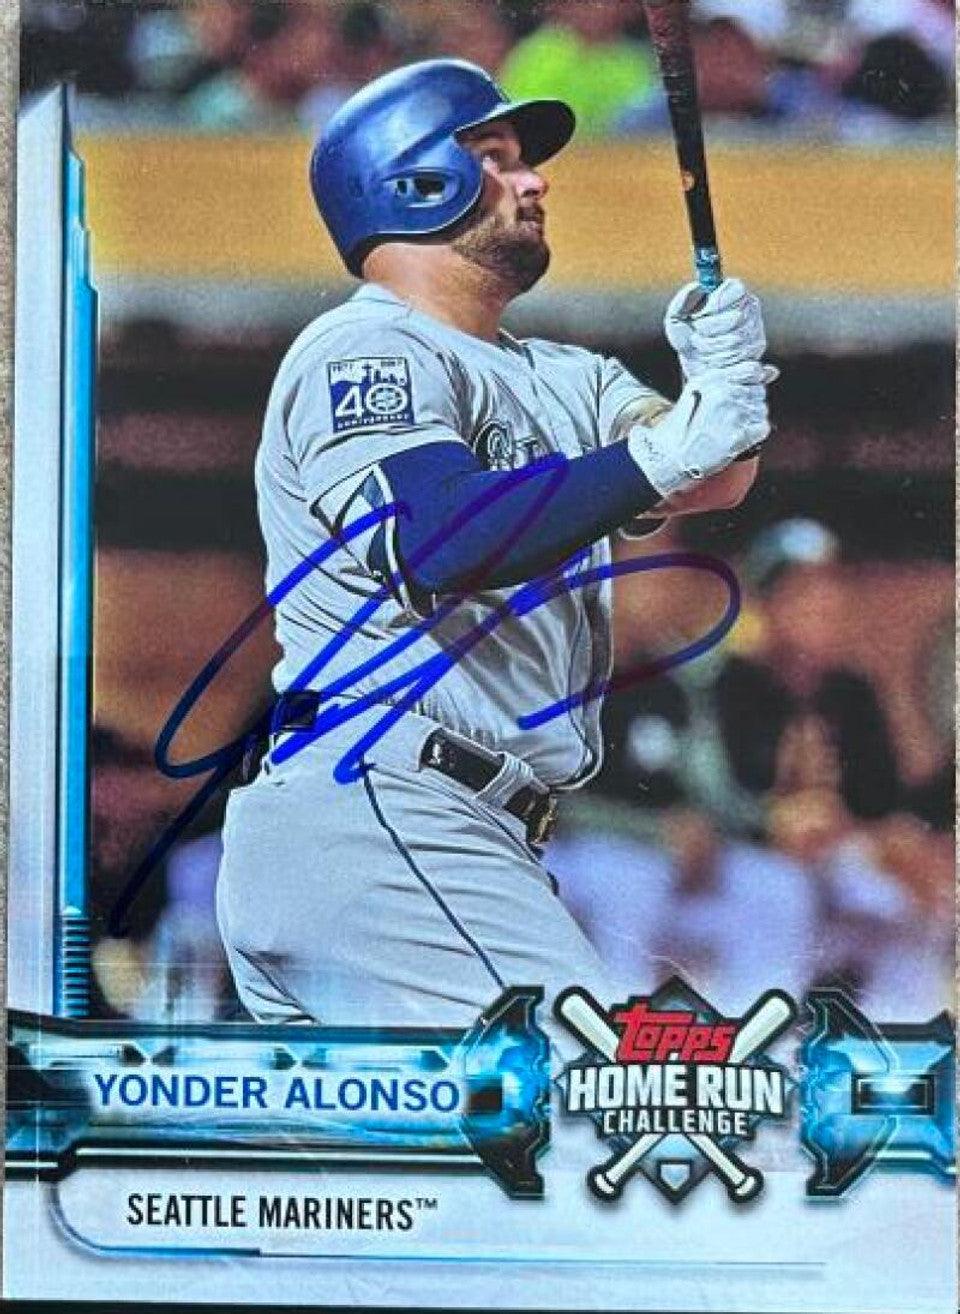 Yonder Alonso Signed 2018 Topps Home Run Challenge Baseball Card - Seattle Mariners - PastPros